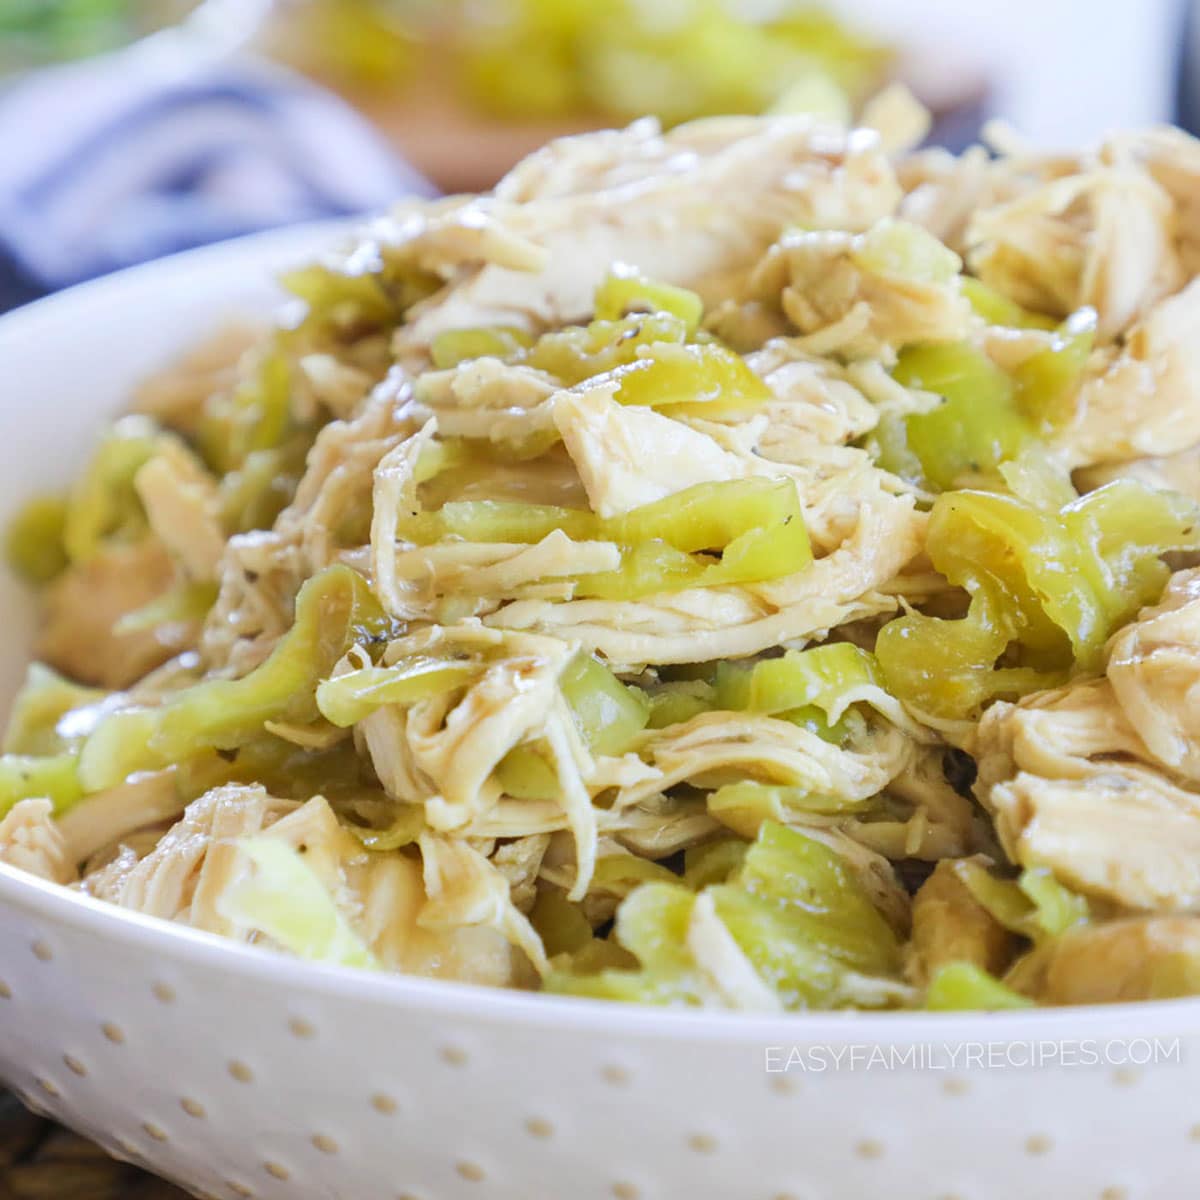 This crockpot Mississippi chicken coukd not be any easier! Recipe